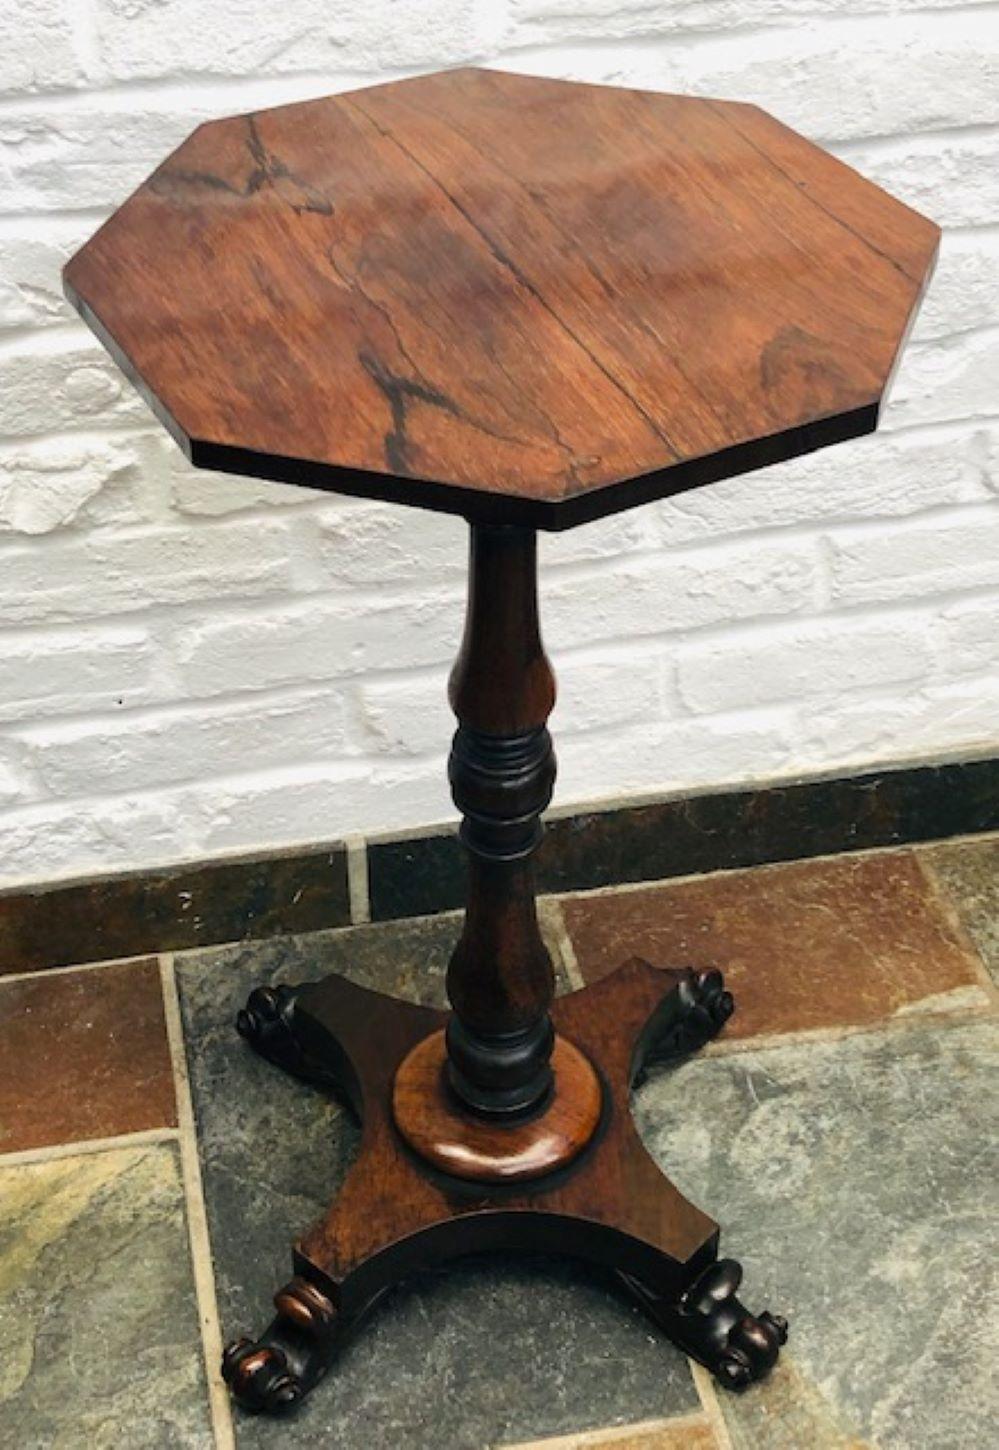 Antique Regency 19th cent octagonal rosewood wine table, English, 1820 

This is a very nice quality octagonal rosewood wine table, supported 
on a finely turned column supported by a quattro form base, ending in 
carved paw feet. Great colour